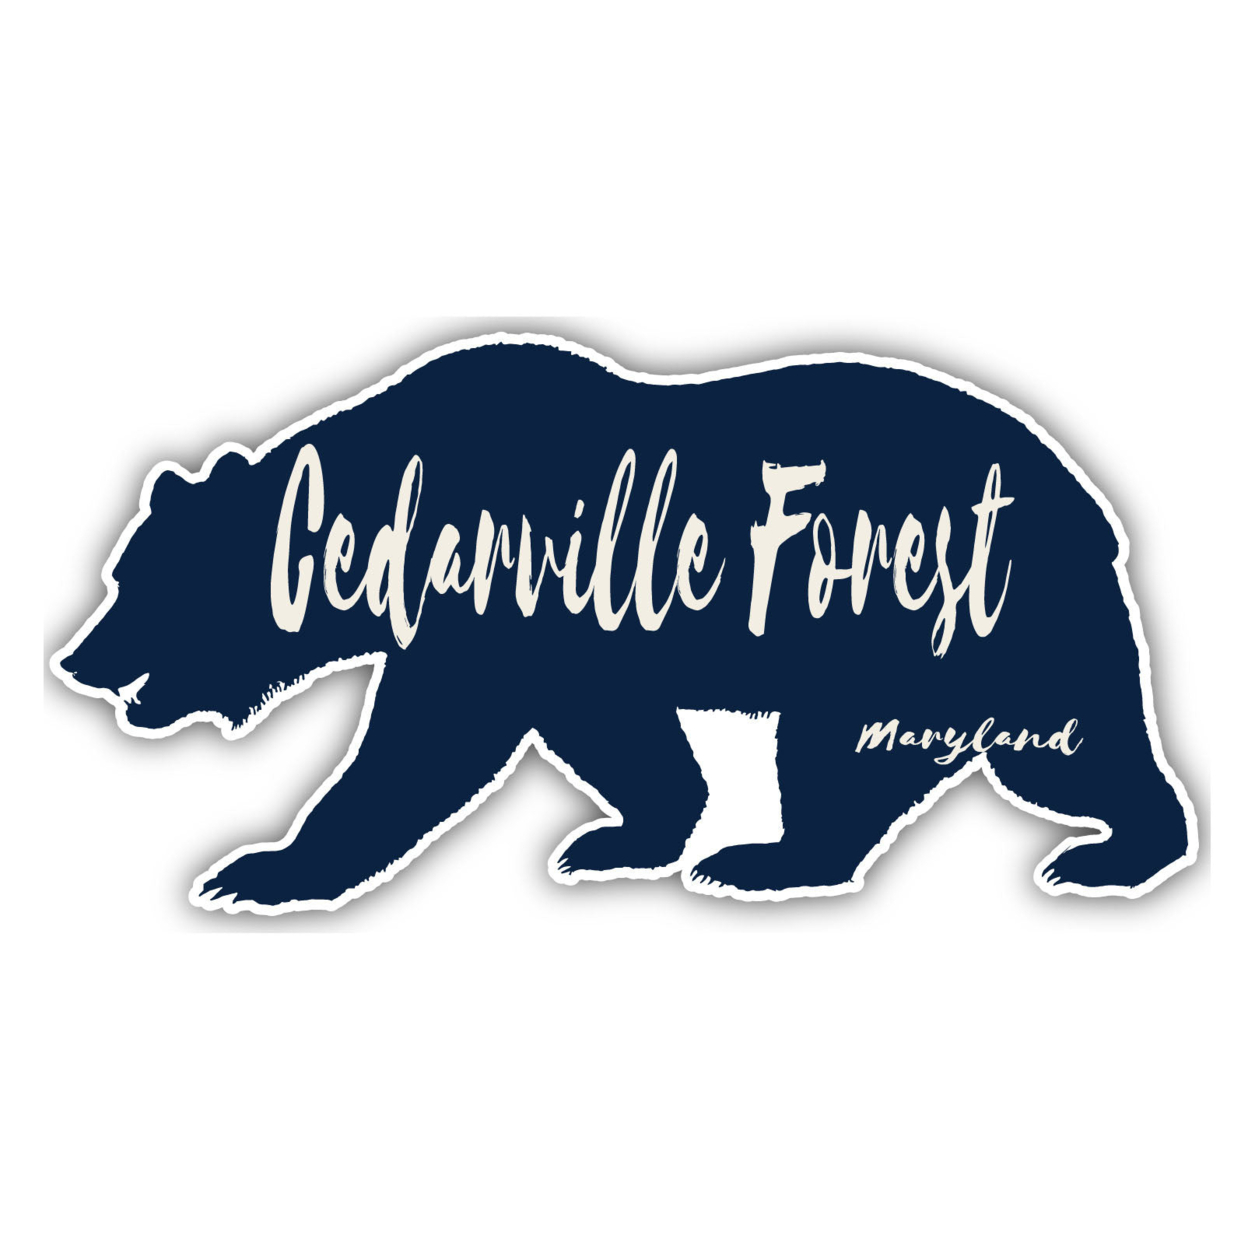 Cedarville Forest Maryland Souvenir Decorative Stickers (Choose Theme And Size) - Single Unit, 2-Inch, Bear